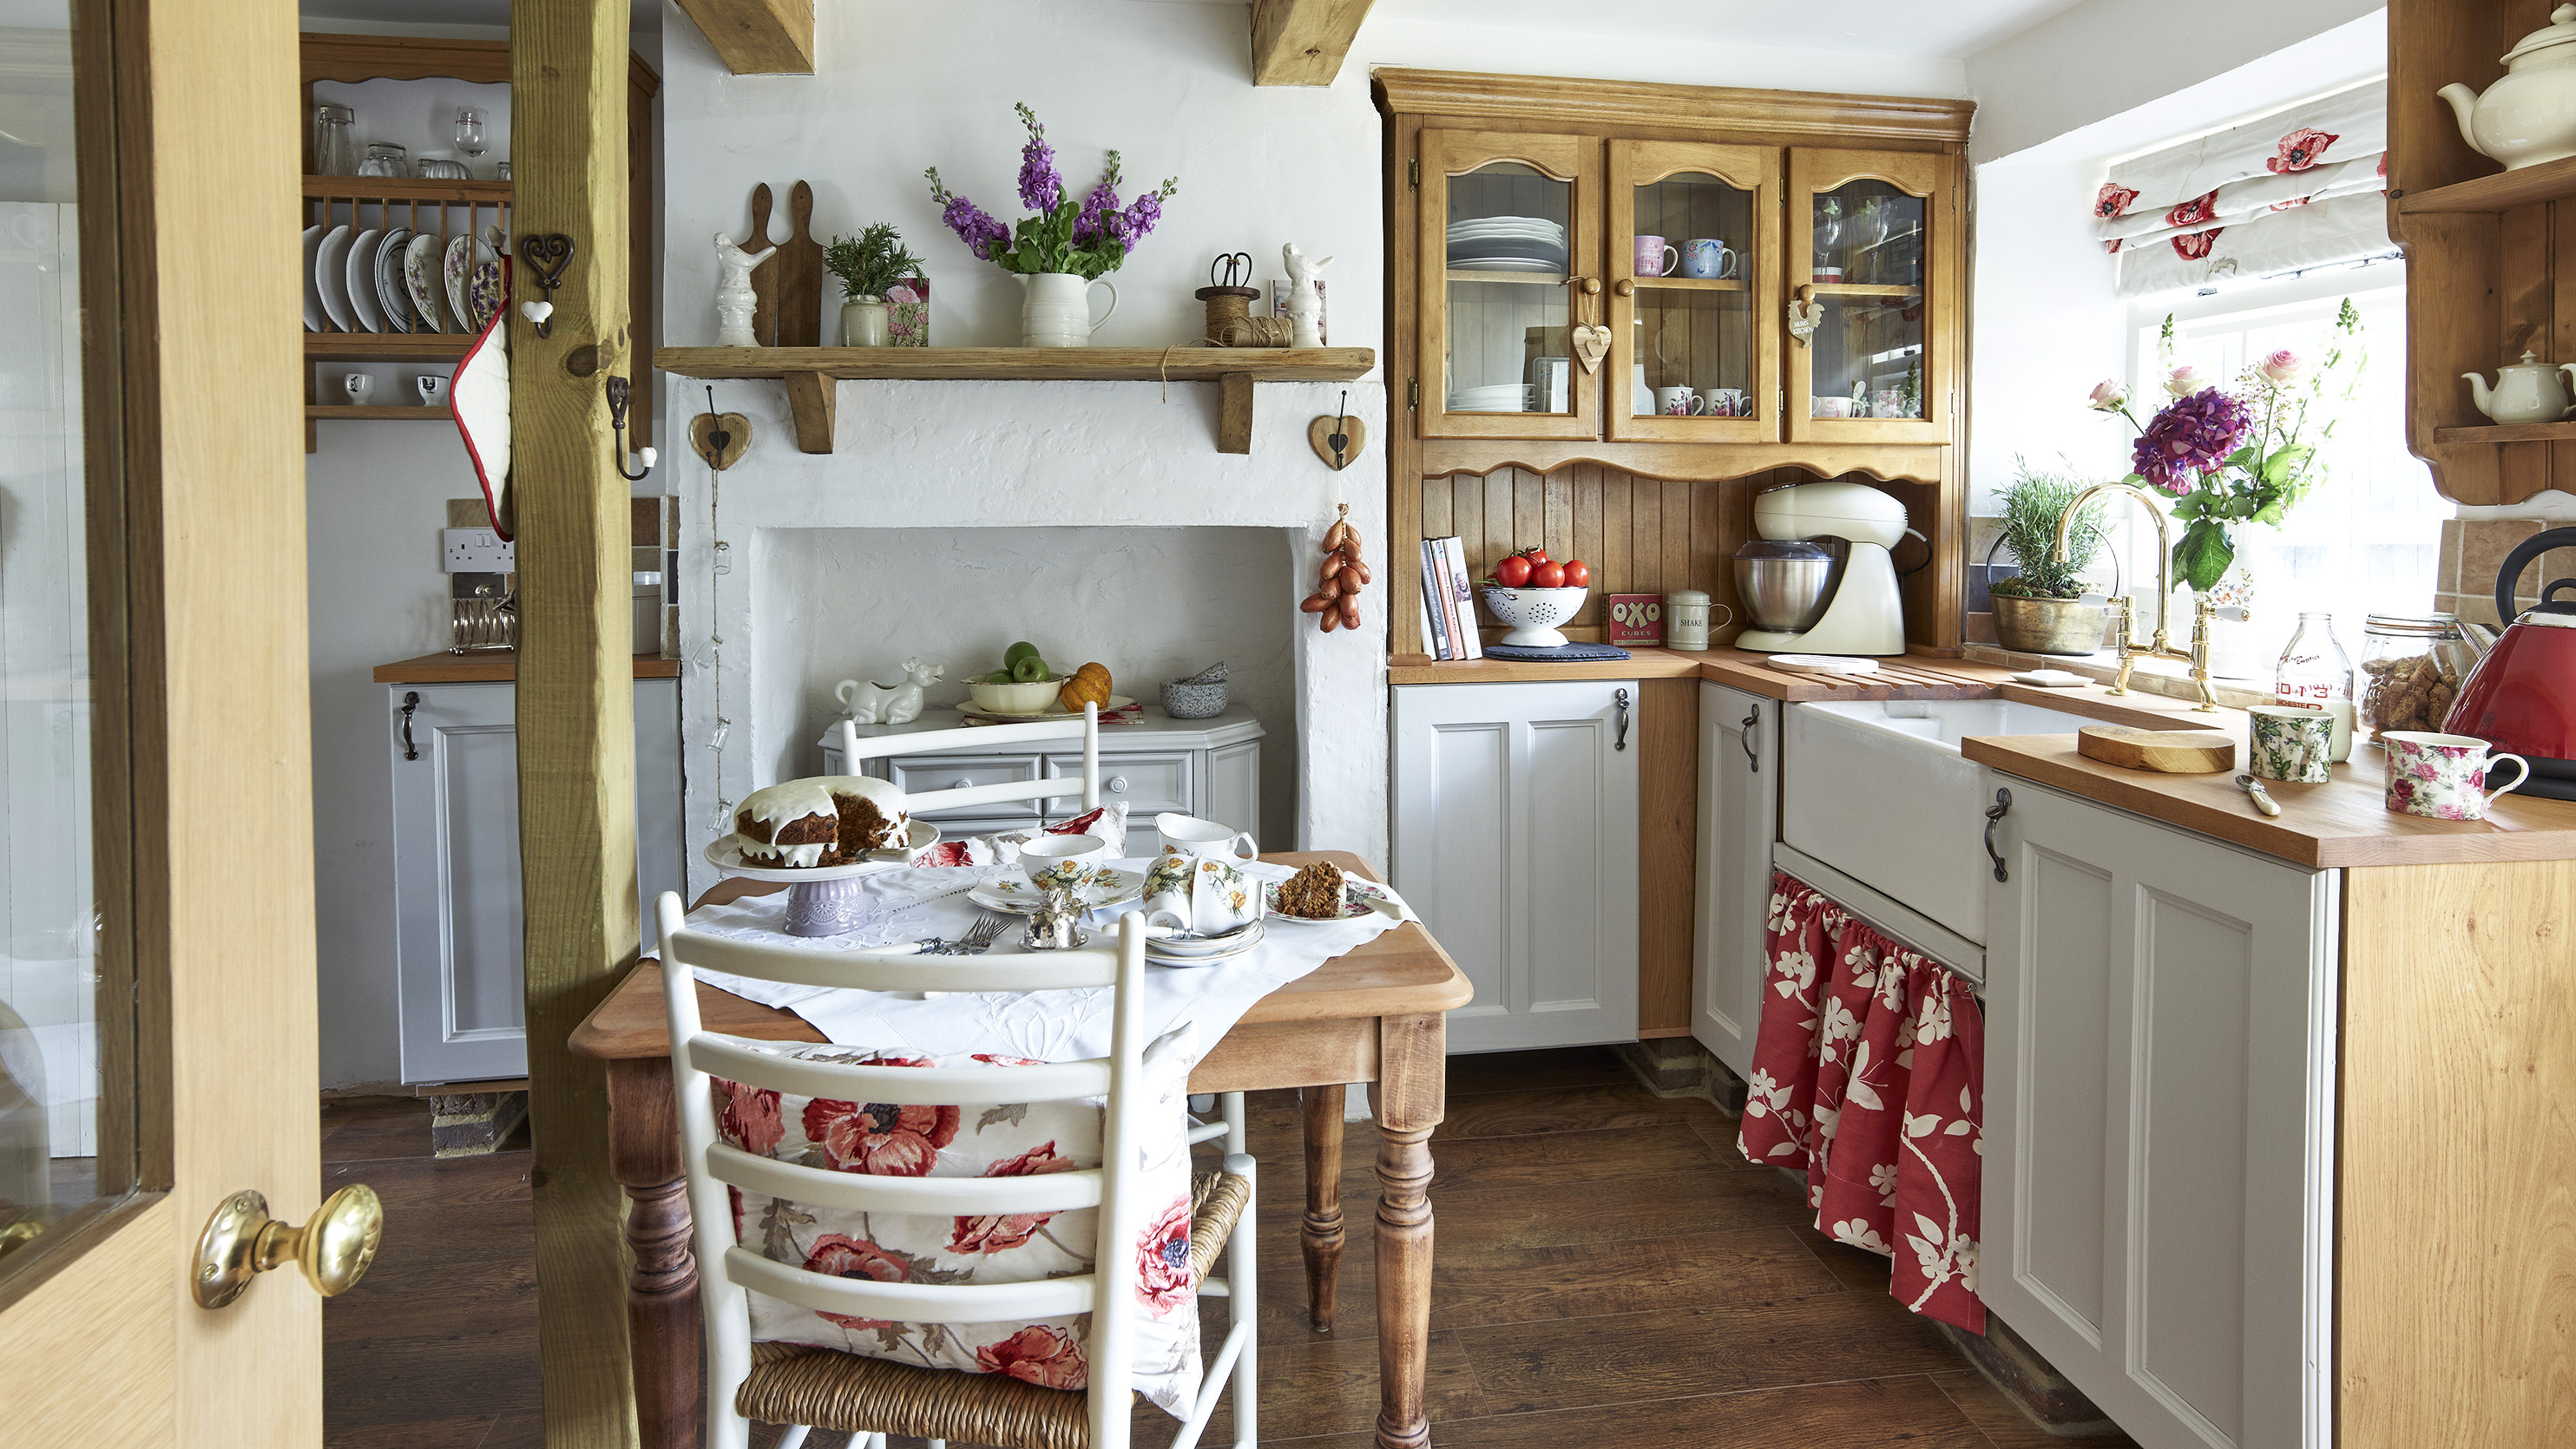 Cottage Kitchens 16 Inspiring Ideas For Your Room Real Homes